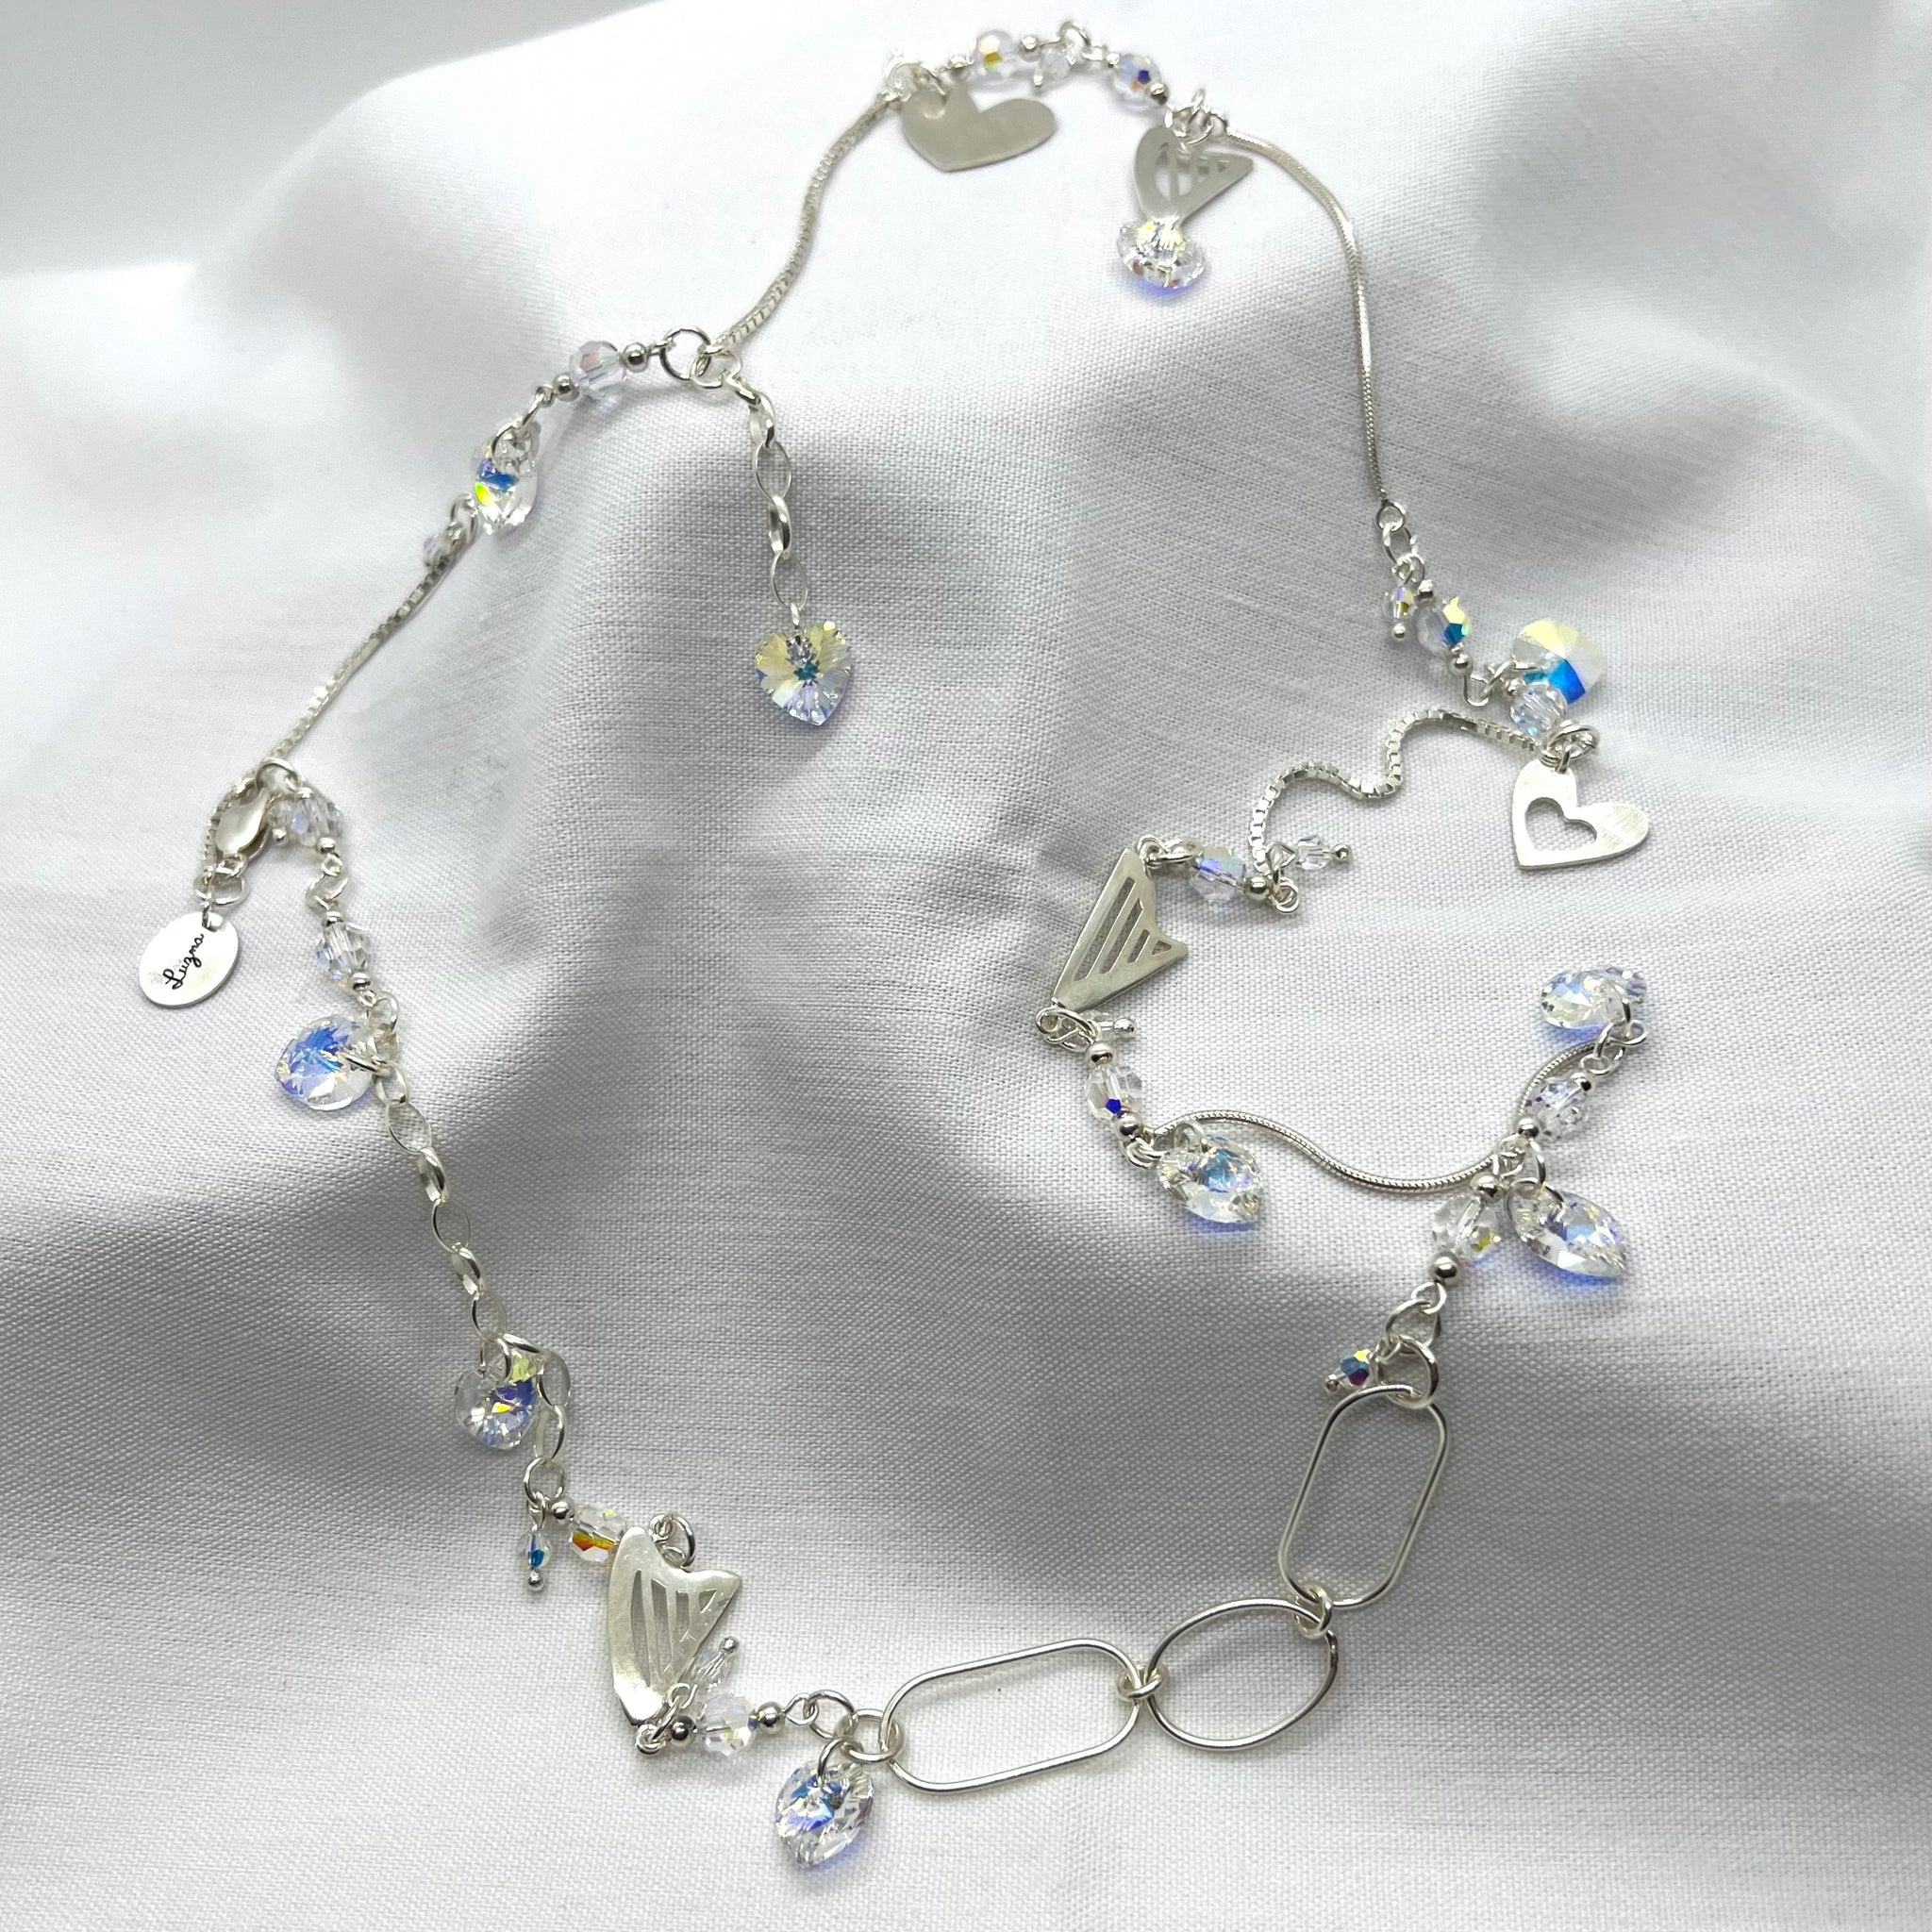 LONG NECKLACE WITH HARPS AND CLEAR SWAROVSKI HEARTS & CRYSTALS